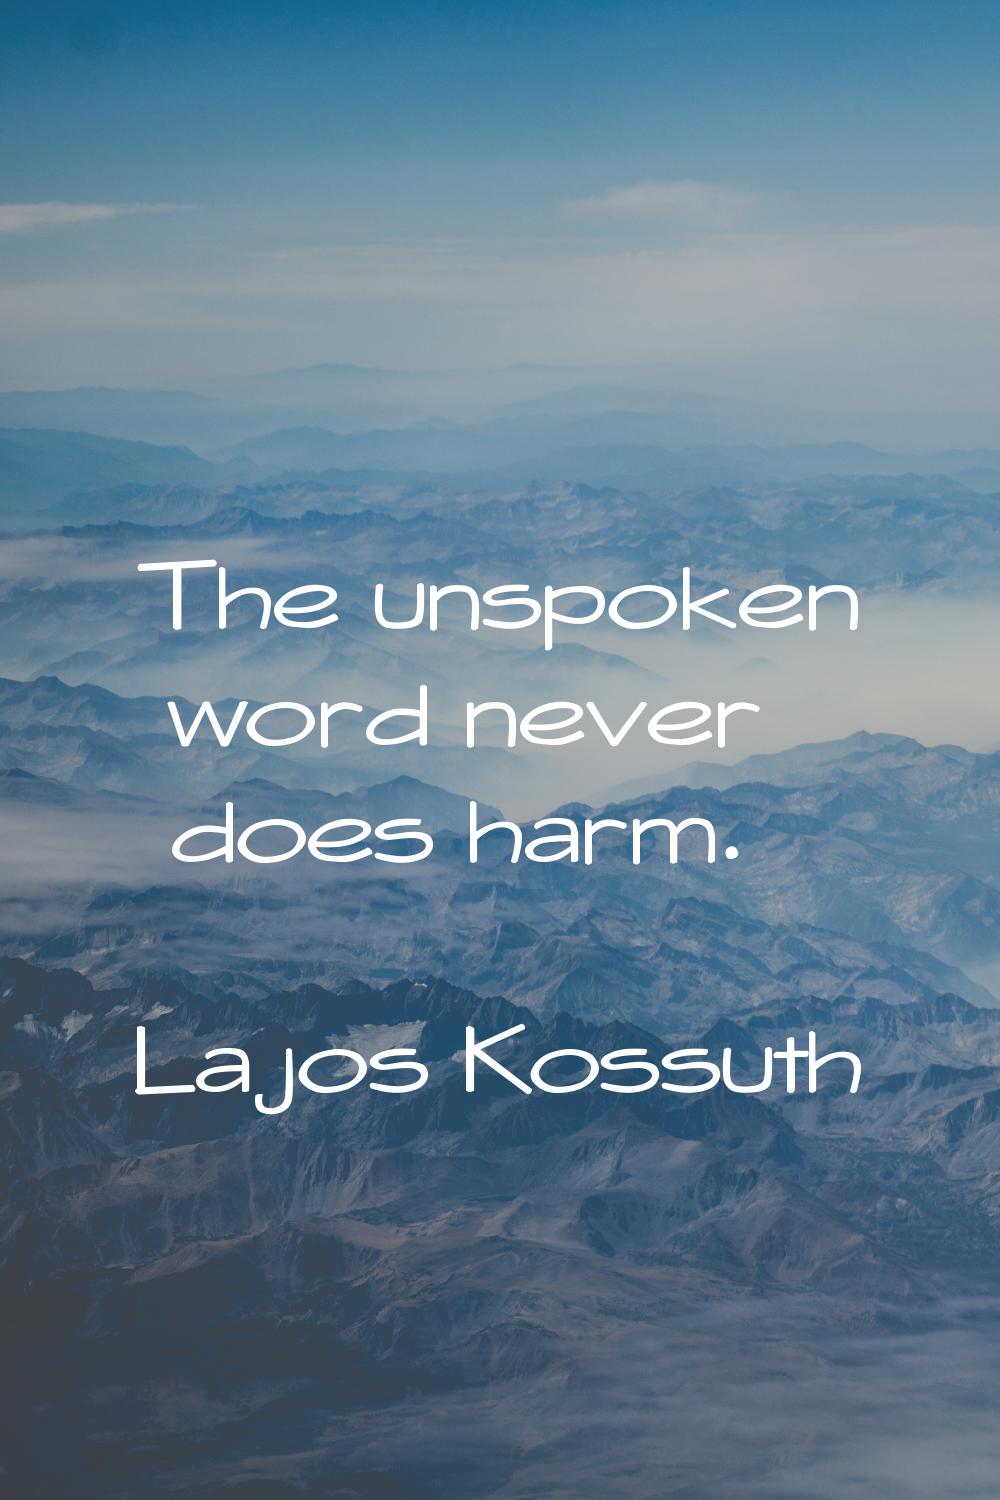 The unspoken word never does harm.